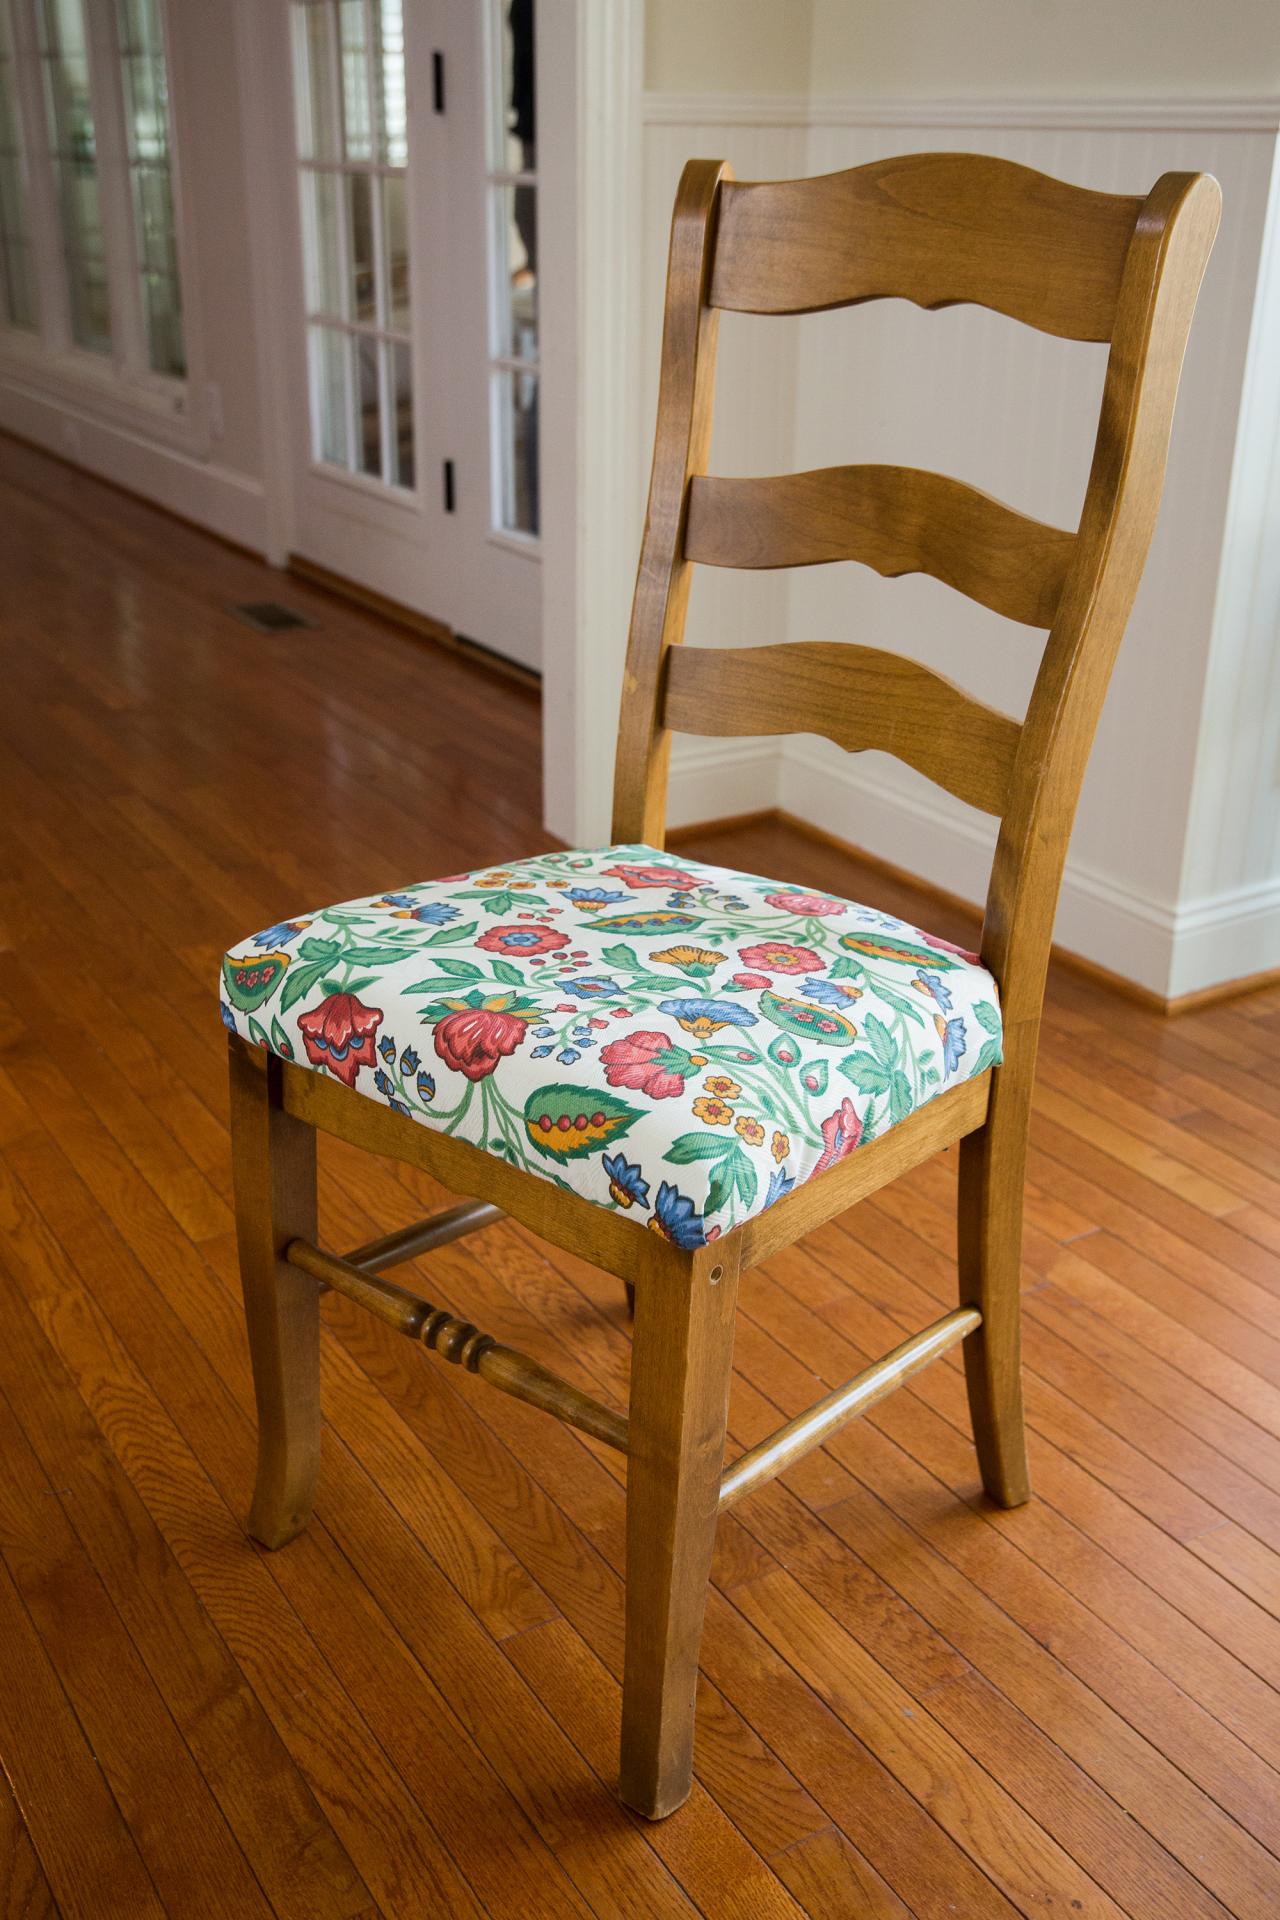 How To Re Cover A Dining Room Chair, Upholstering Dining Room Chairs